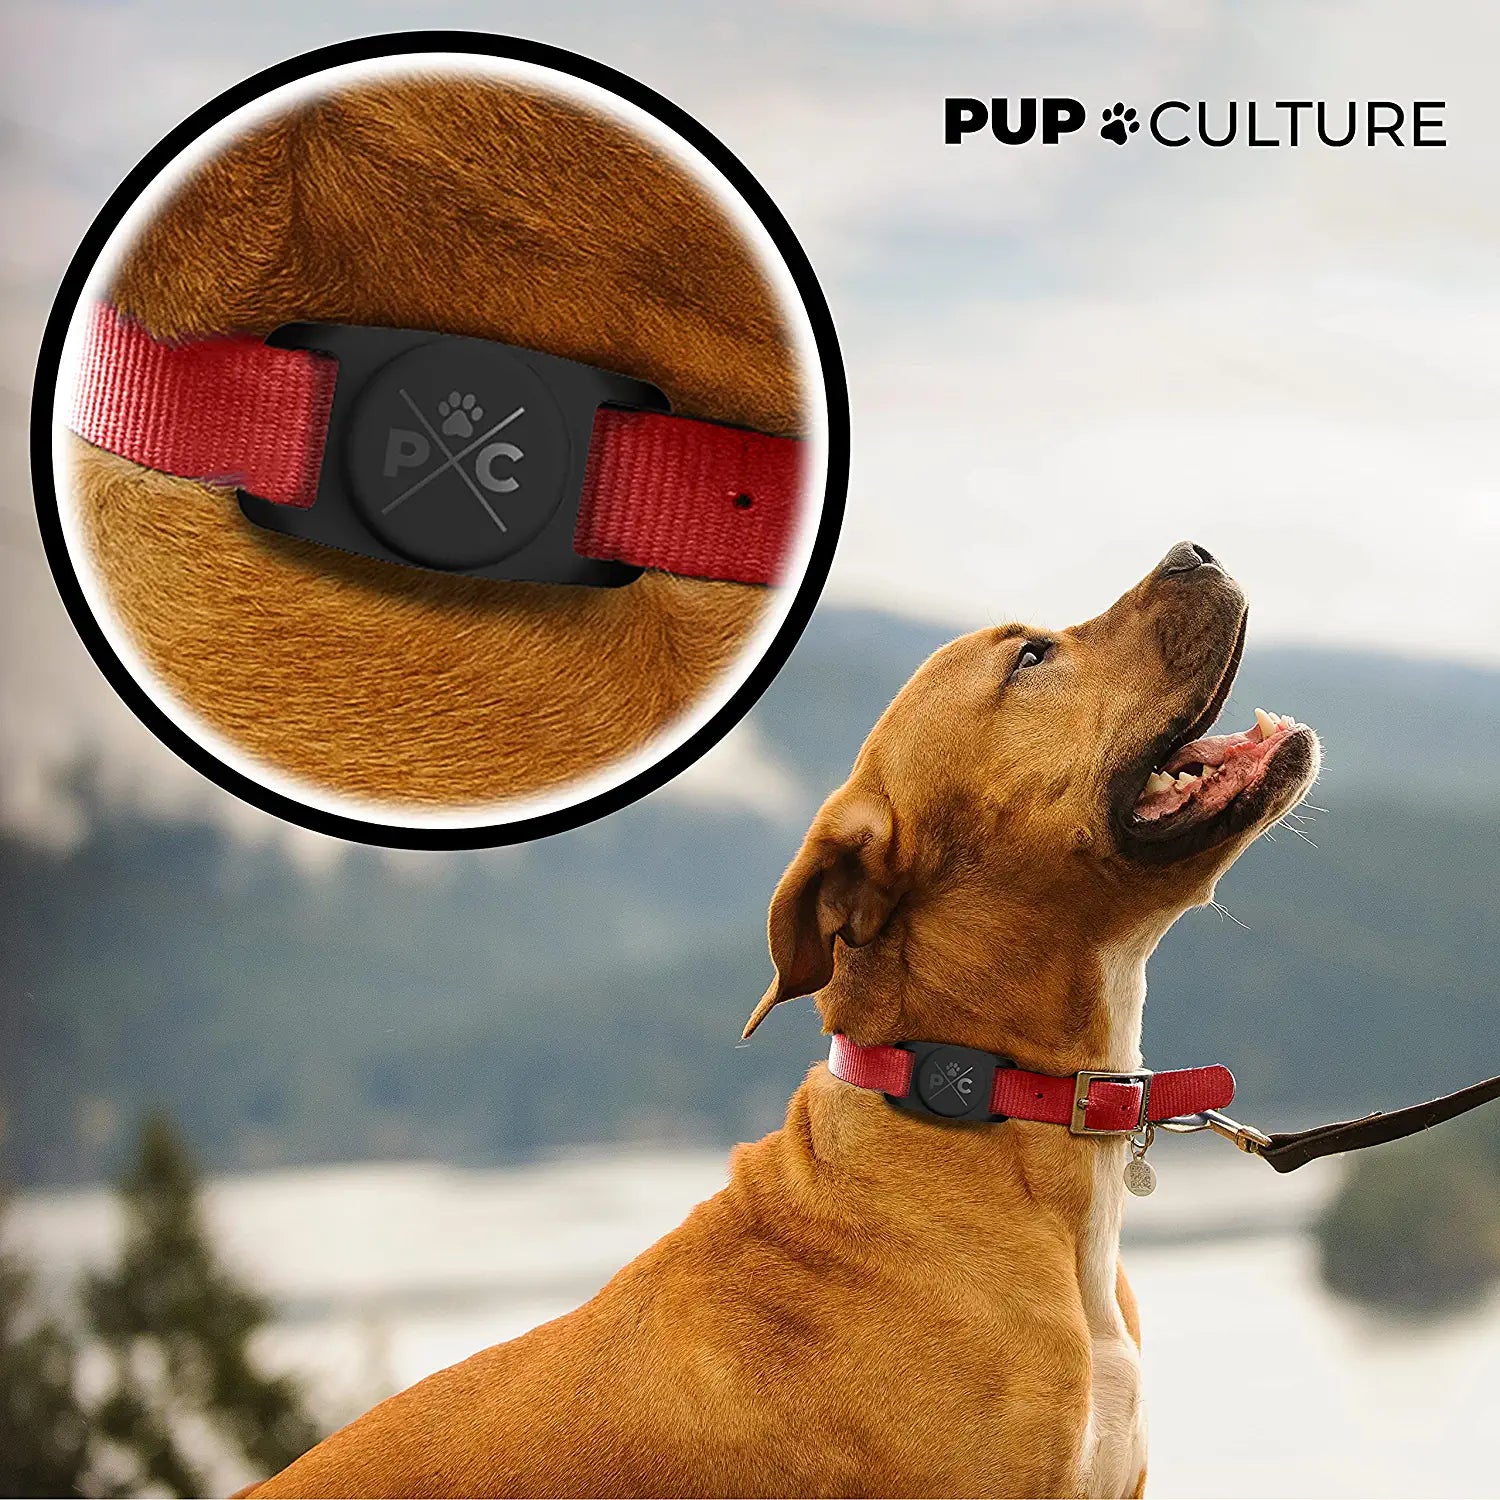 Pup Culture Airtag Dog Collar Holder, Protective Airtag Case for Dog Collar, Airtag Loop for GPS Dog Tracker, Dog Trackers for Apple Iphone, Airtag Pet, Dog Airtag Holder Electronics > GPS Accessories > GPS Cases Pup Culture   